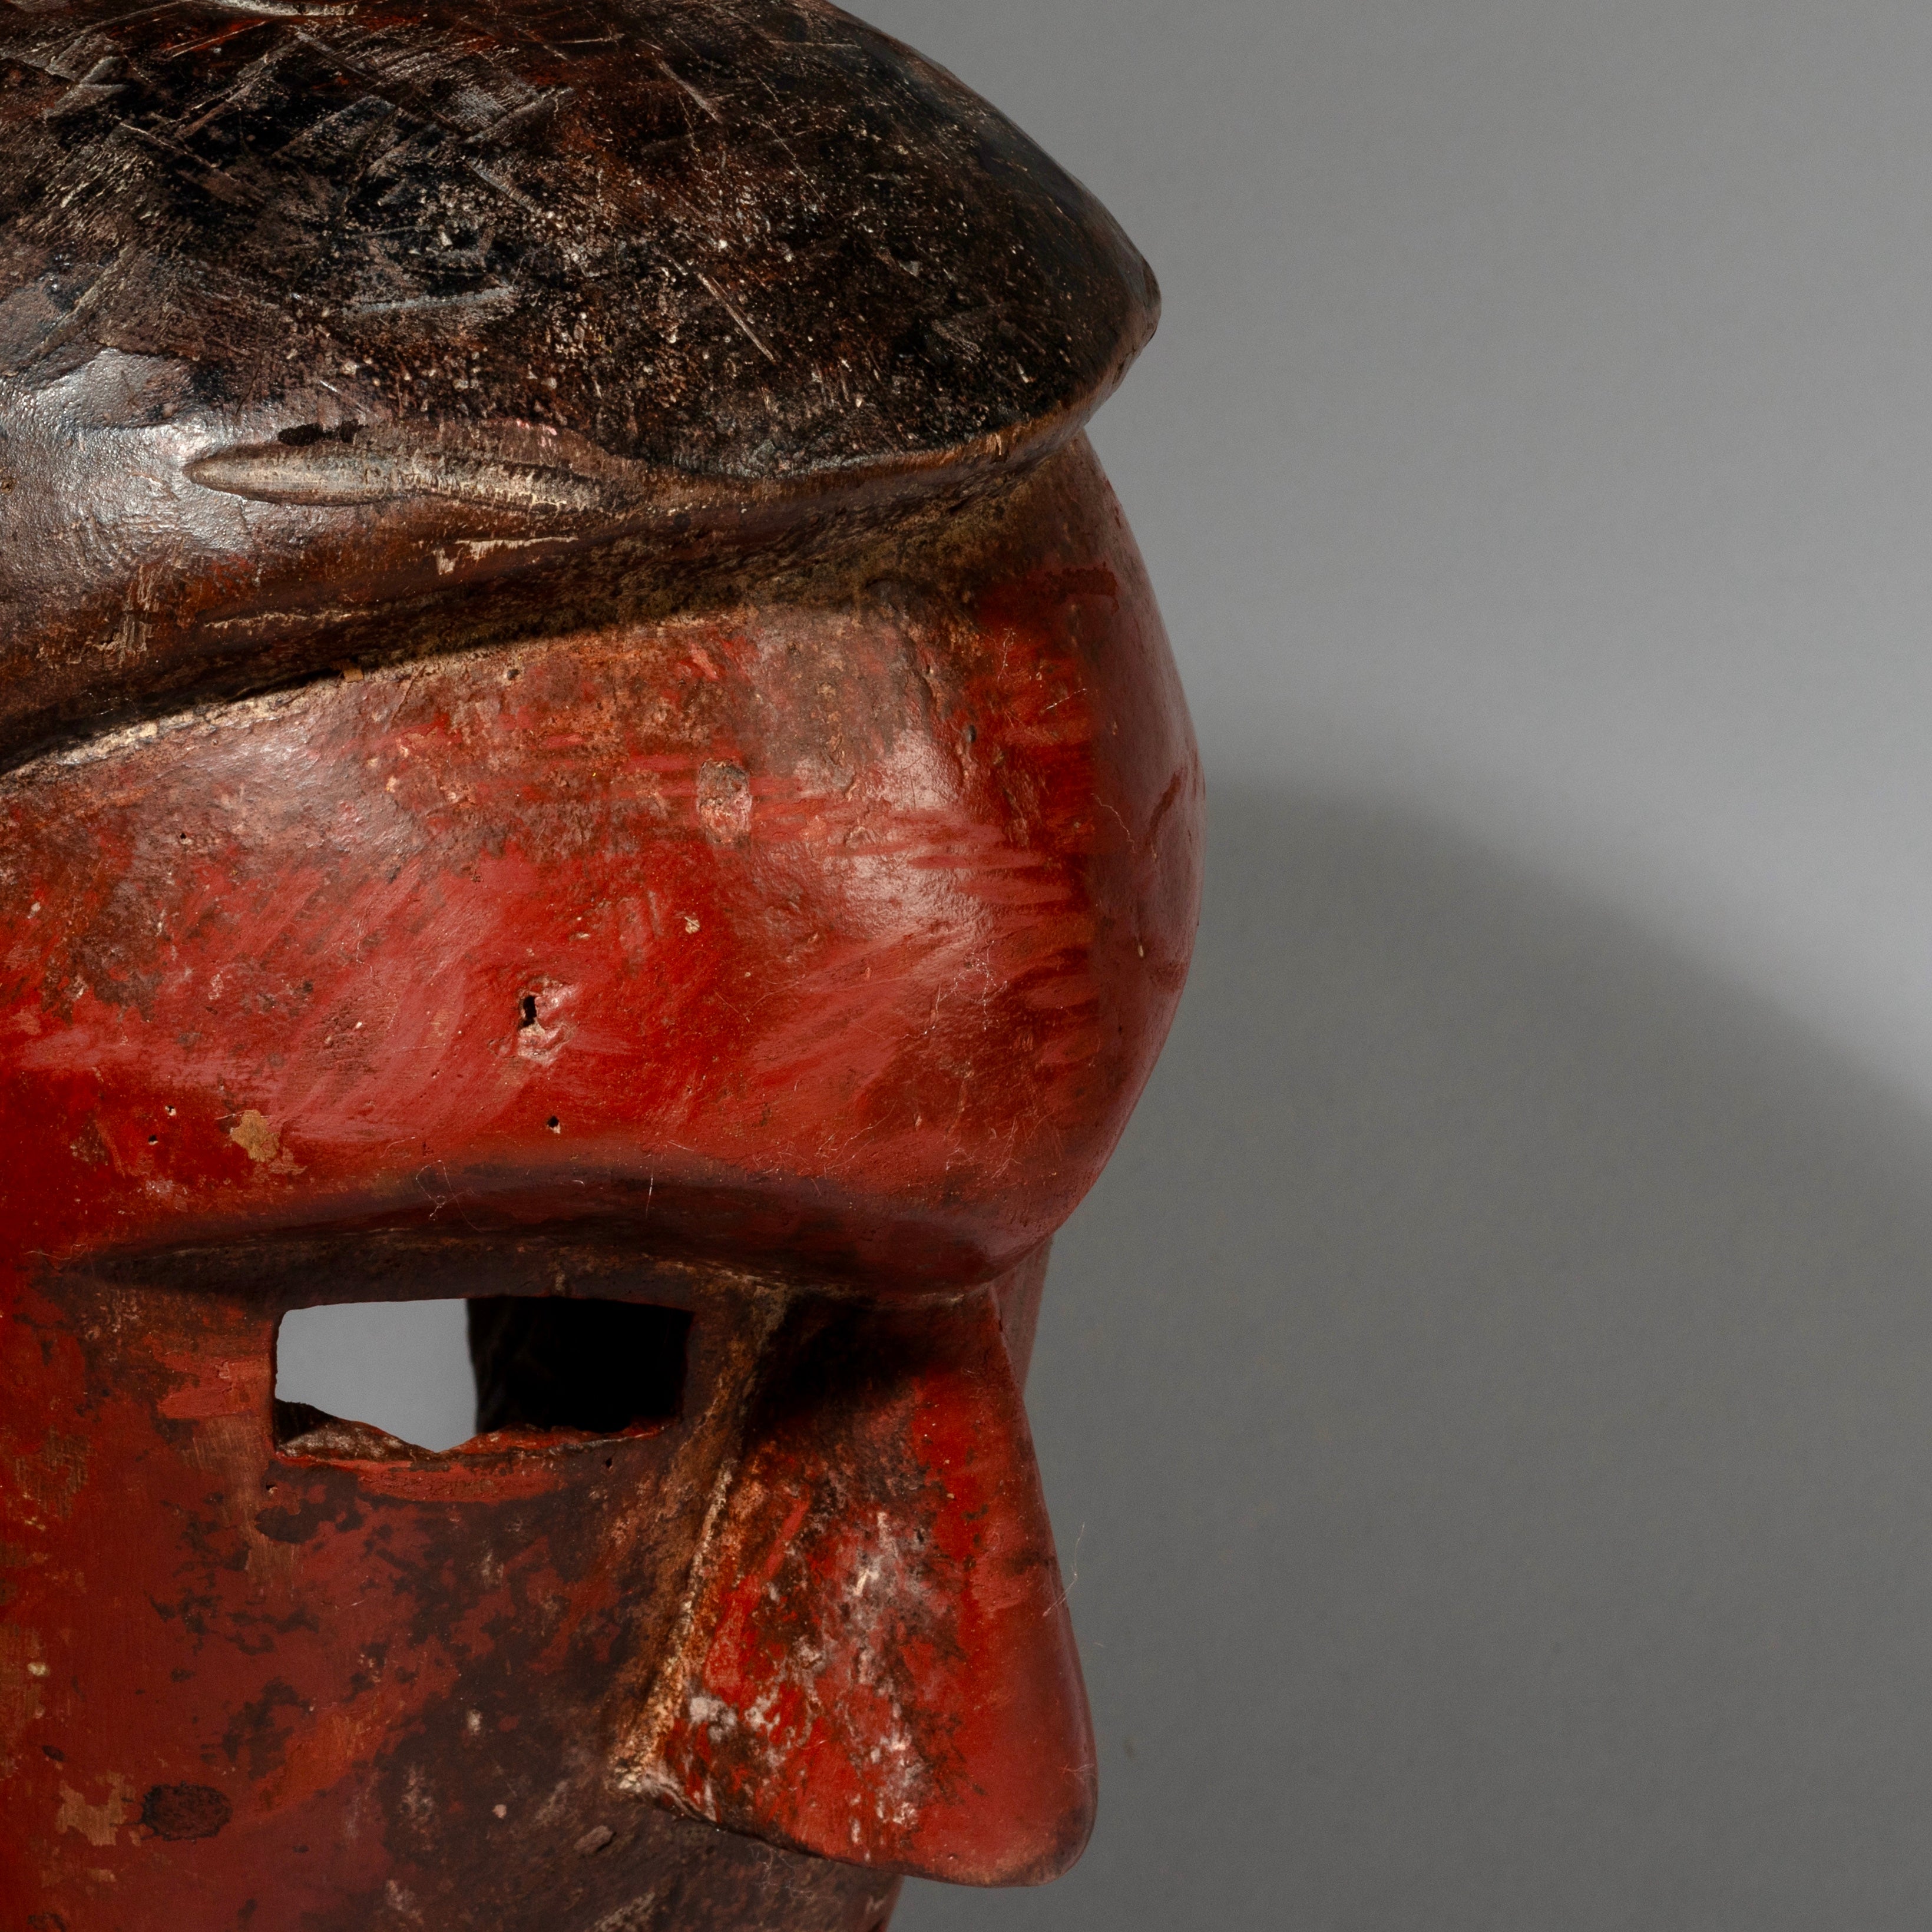 A RED SCULPTURAL + SUBSTANTIAL MASK FROM THE SUKUMA TRIBE, TANZANIA, EAST AFRICA( No 2130 )